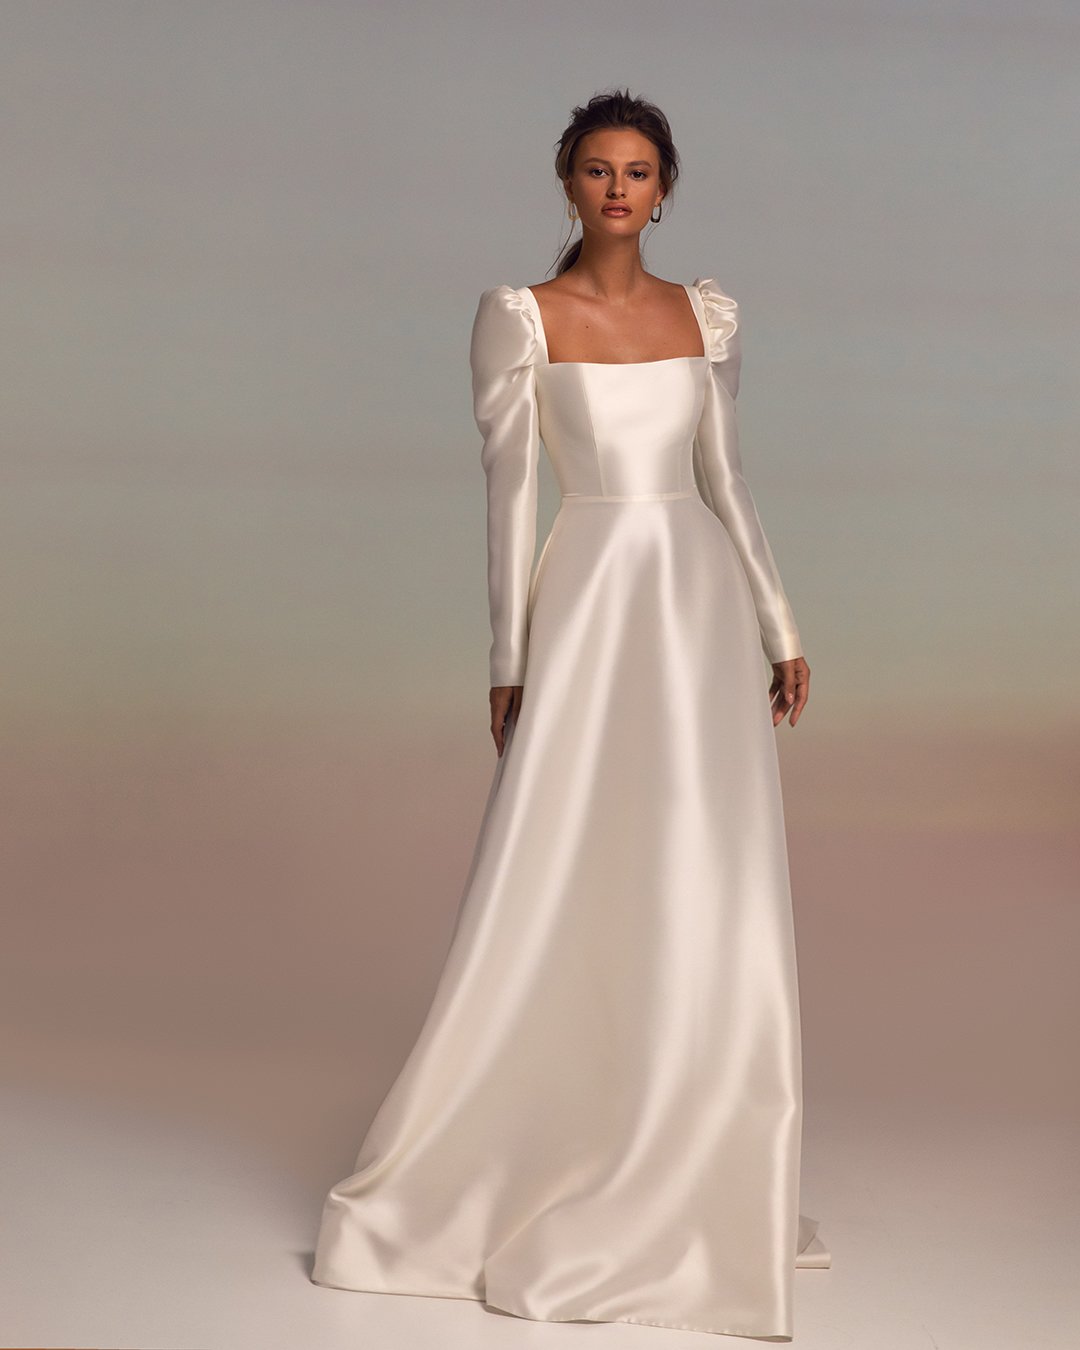 modest wedding dresses a line with long sleeves simple rebel